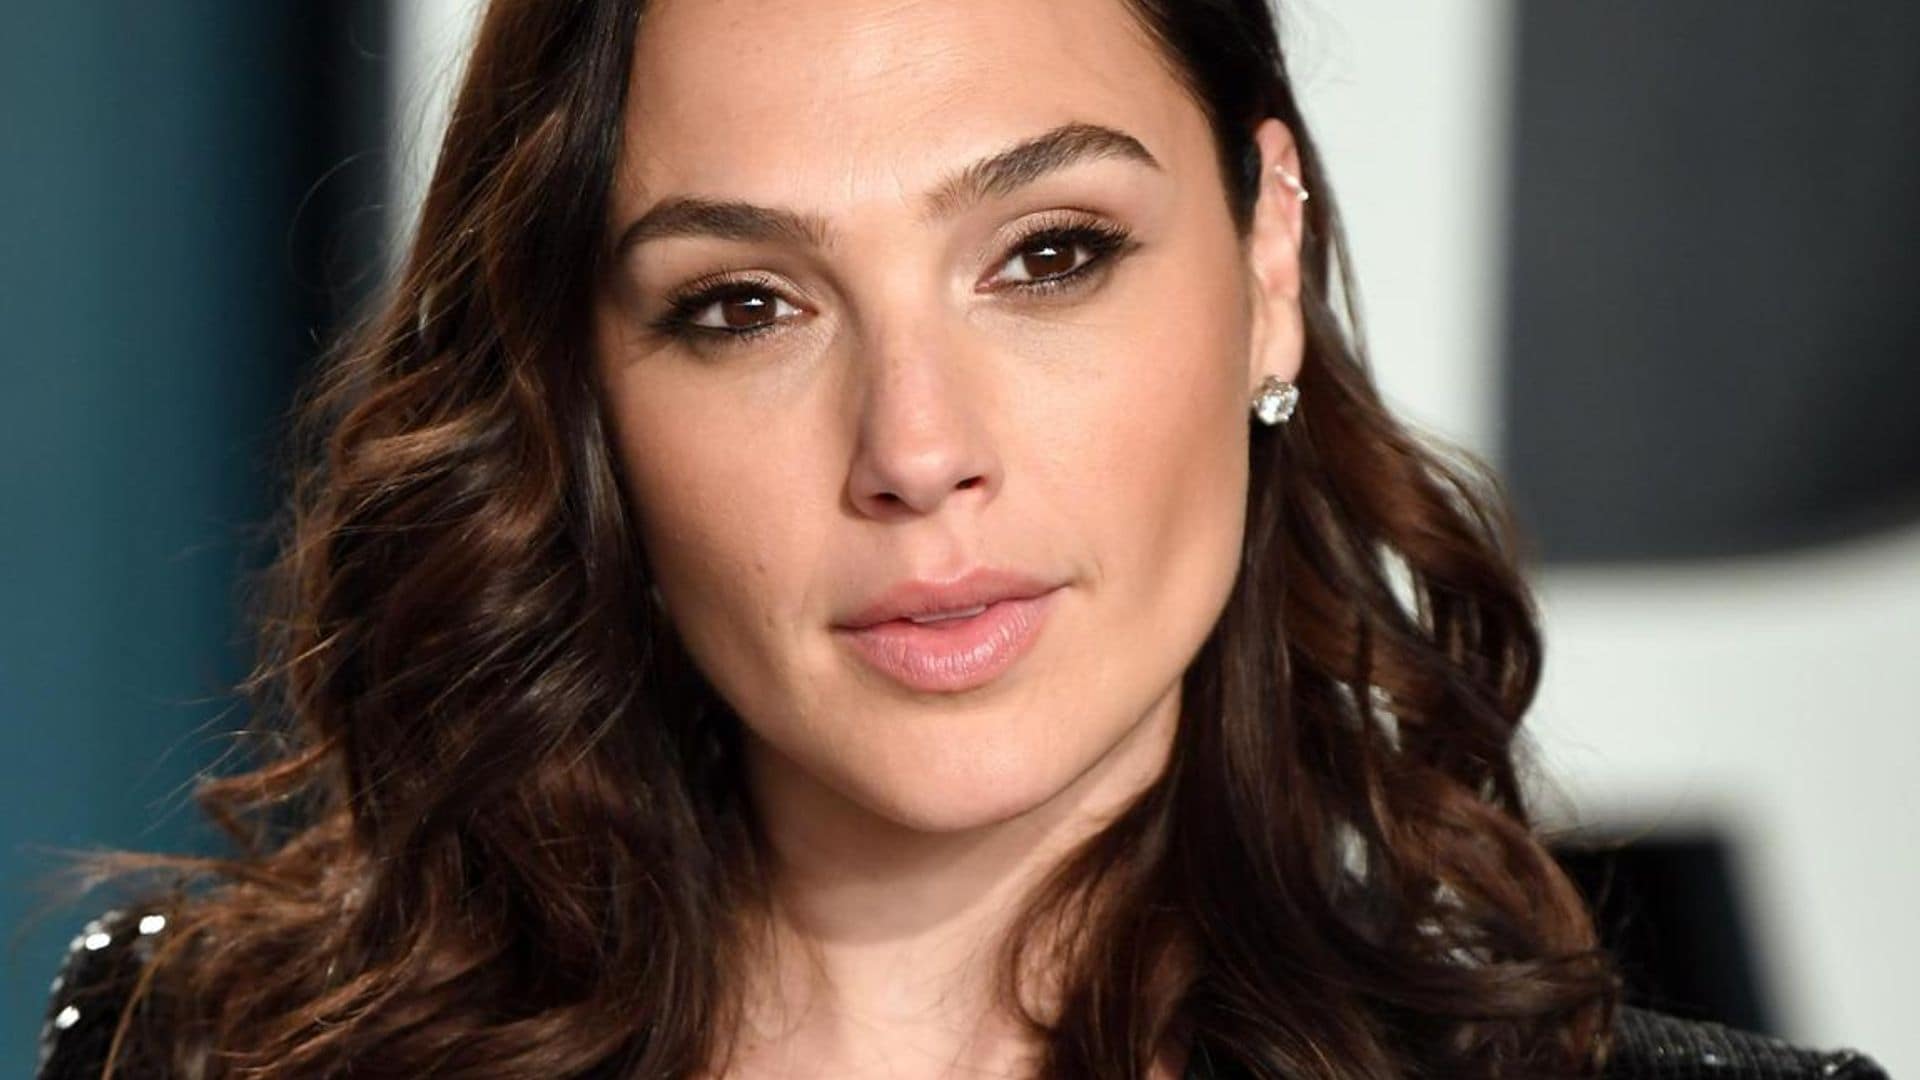 Gal Gadot causes controversy with her new iconic role in upcoming historical drama